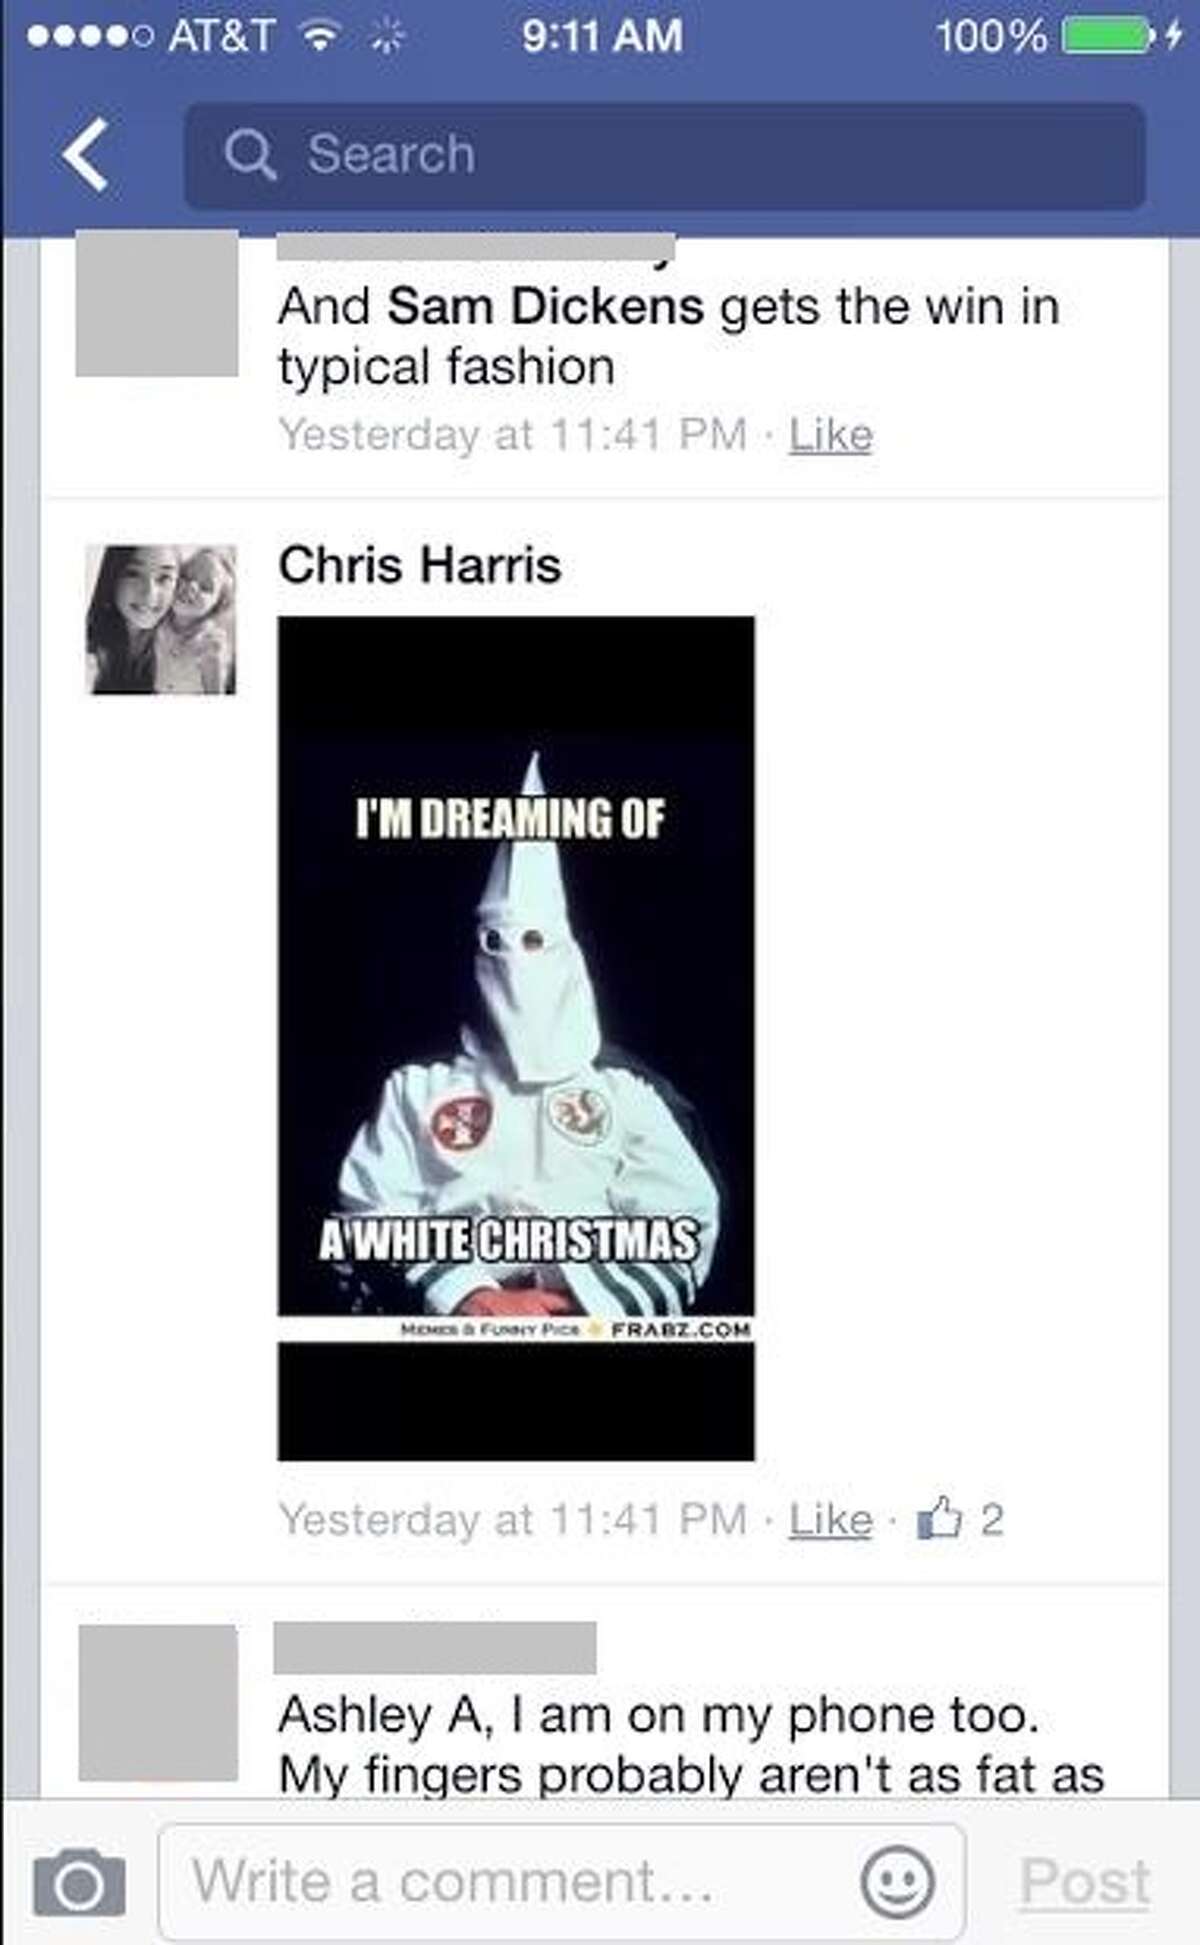 In early December 2014, Chris Harris, a board member at Hooks Independent School District in north Texas, posted a meme of a KKK member with the caption "I'm dreaming of a white Christmas.” Harris posted several “racially sensitive” statements, which led to her resignation, Hooks Superintendent Ronnie Thompson told Raw Story. She posted the meme after a grand jury’s decision to not indict officer Darren Wilson for fatally shooting Michael Brown. Read more: Texas school board member on Facebook: Send KKK to Ferguson to 'settle sh** down'